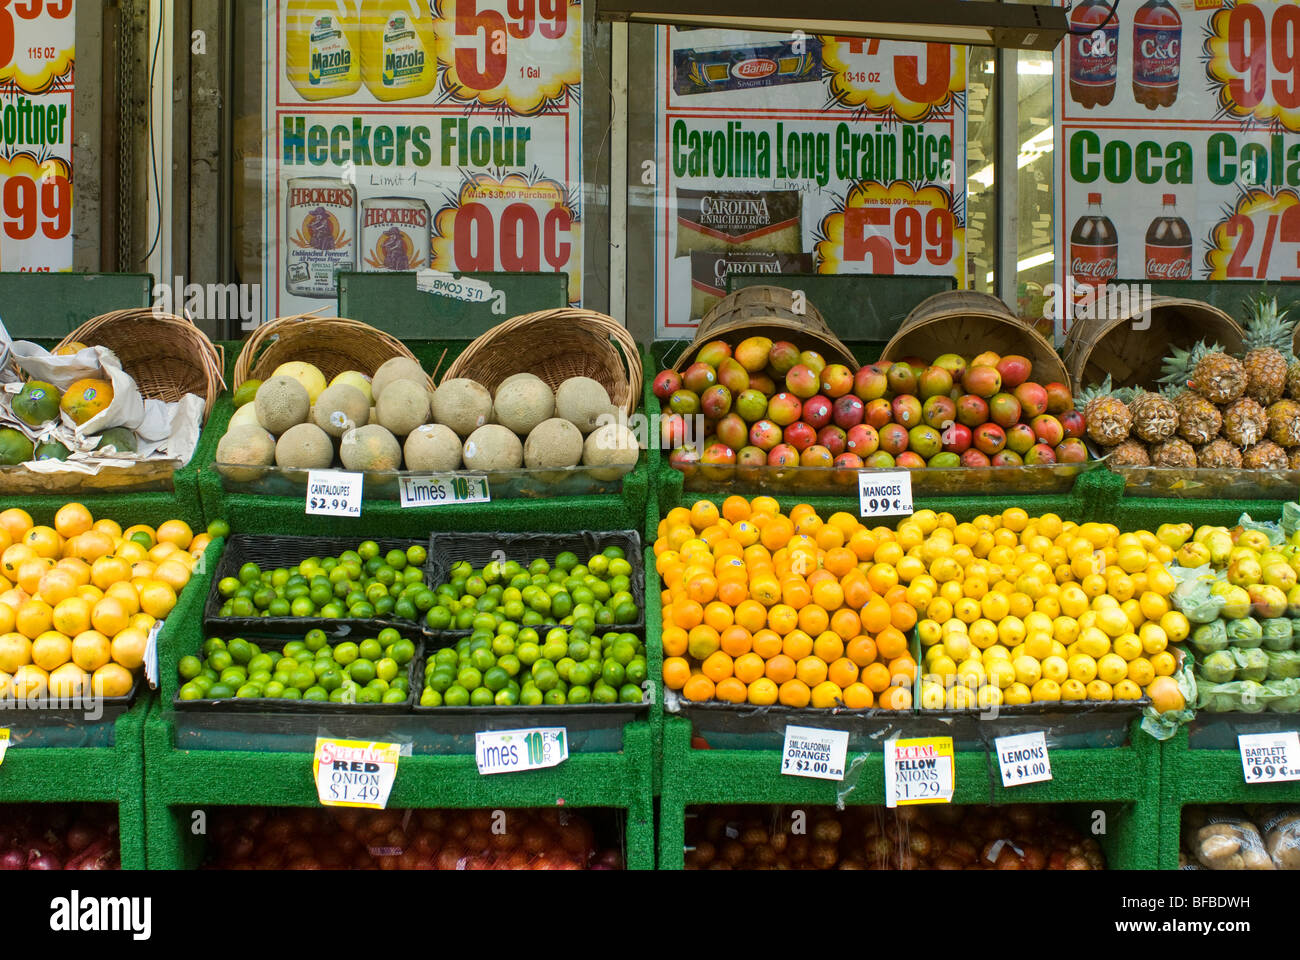 Shopping for produce at a grocery store in the Jackson Heights neighborhood of Queens in New York Stock Photo